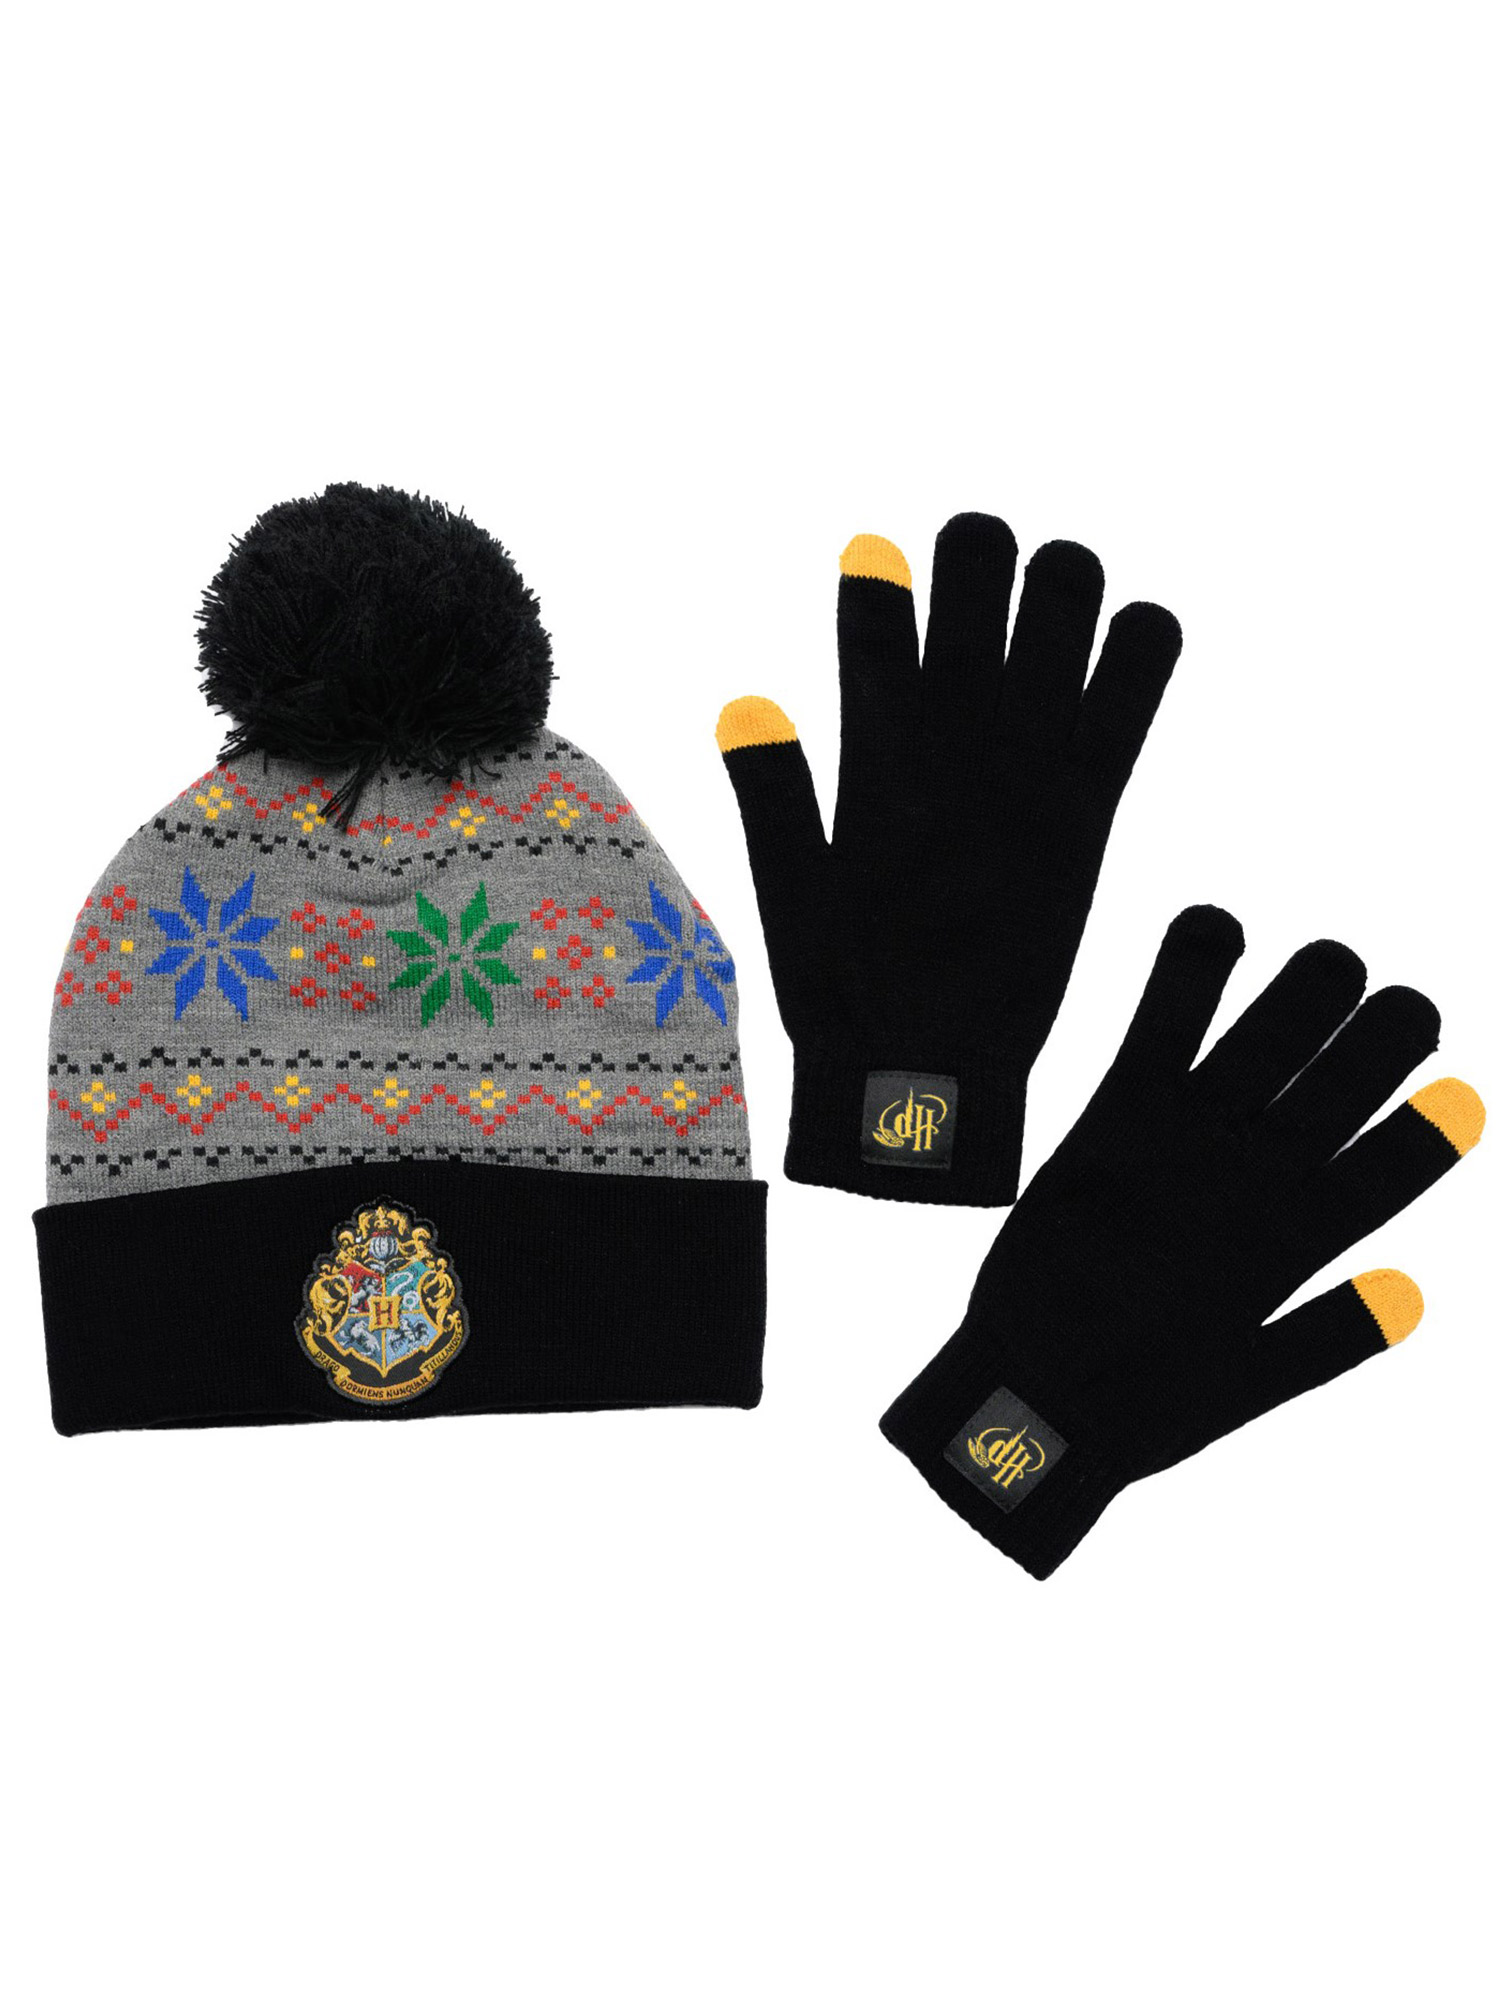 HARRY POTTER Adult Harry Potter Beanie Hat with Gloves Touch Screen Women's Knit Hogwarts Set